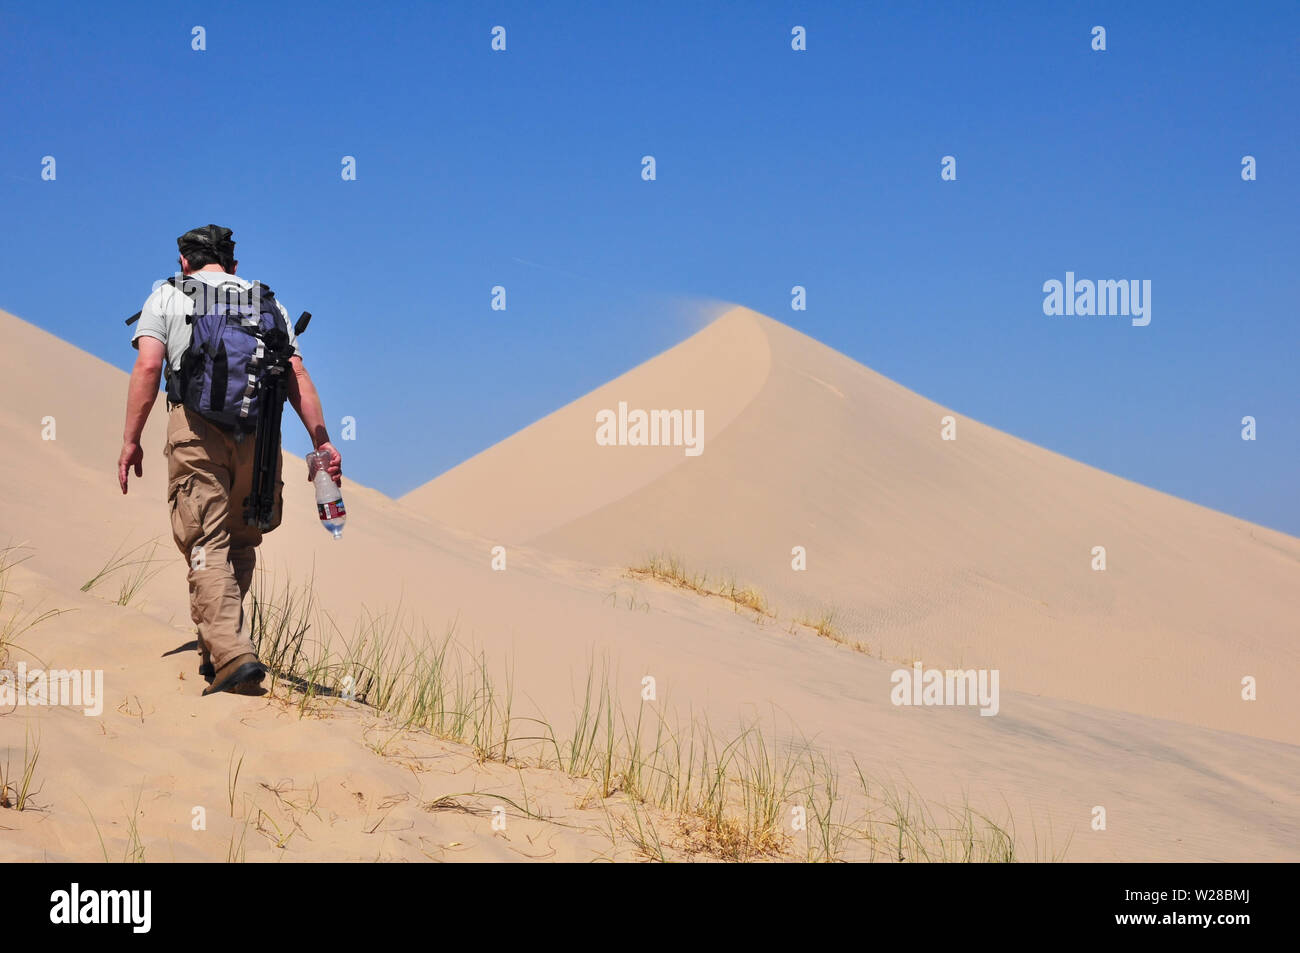 Hiker climbing Kelso dune in Mojave desert, carrying a backpack and a bottle of water to prevent dehydration Stock Photo